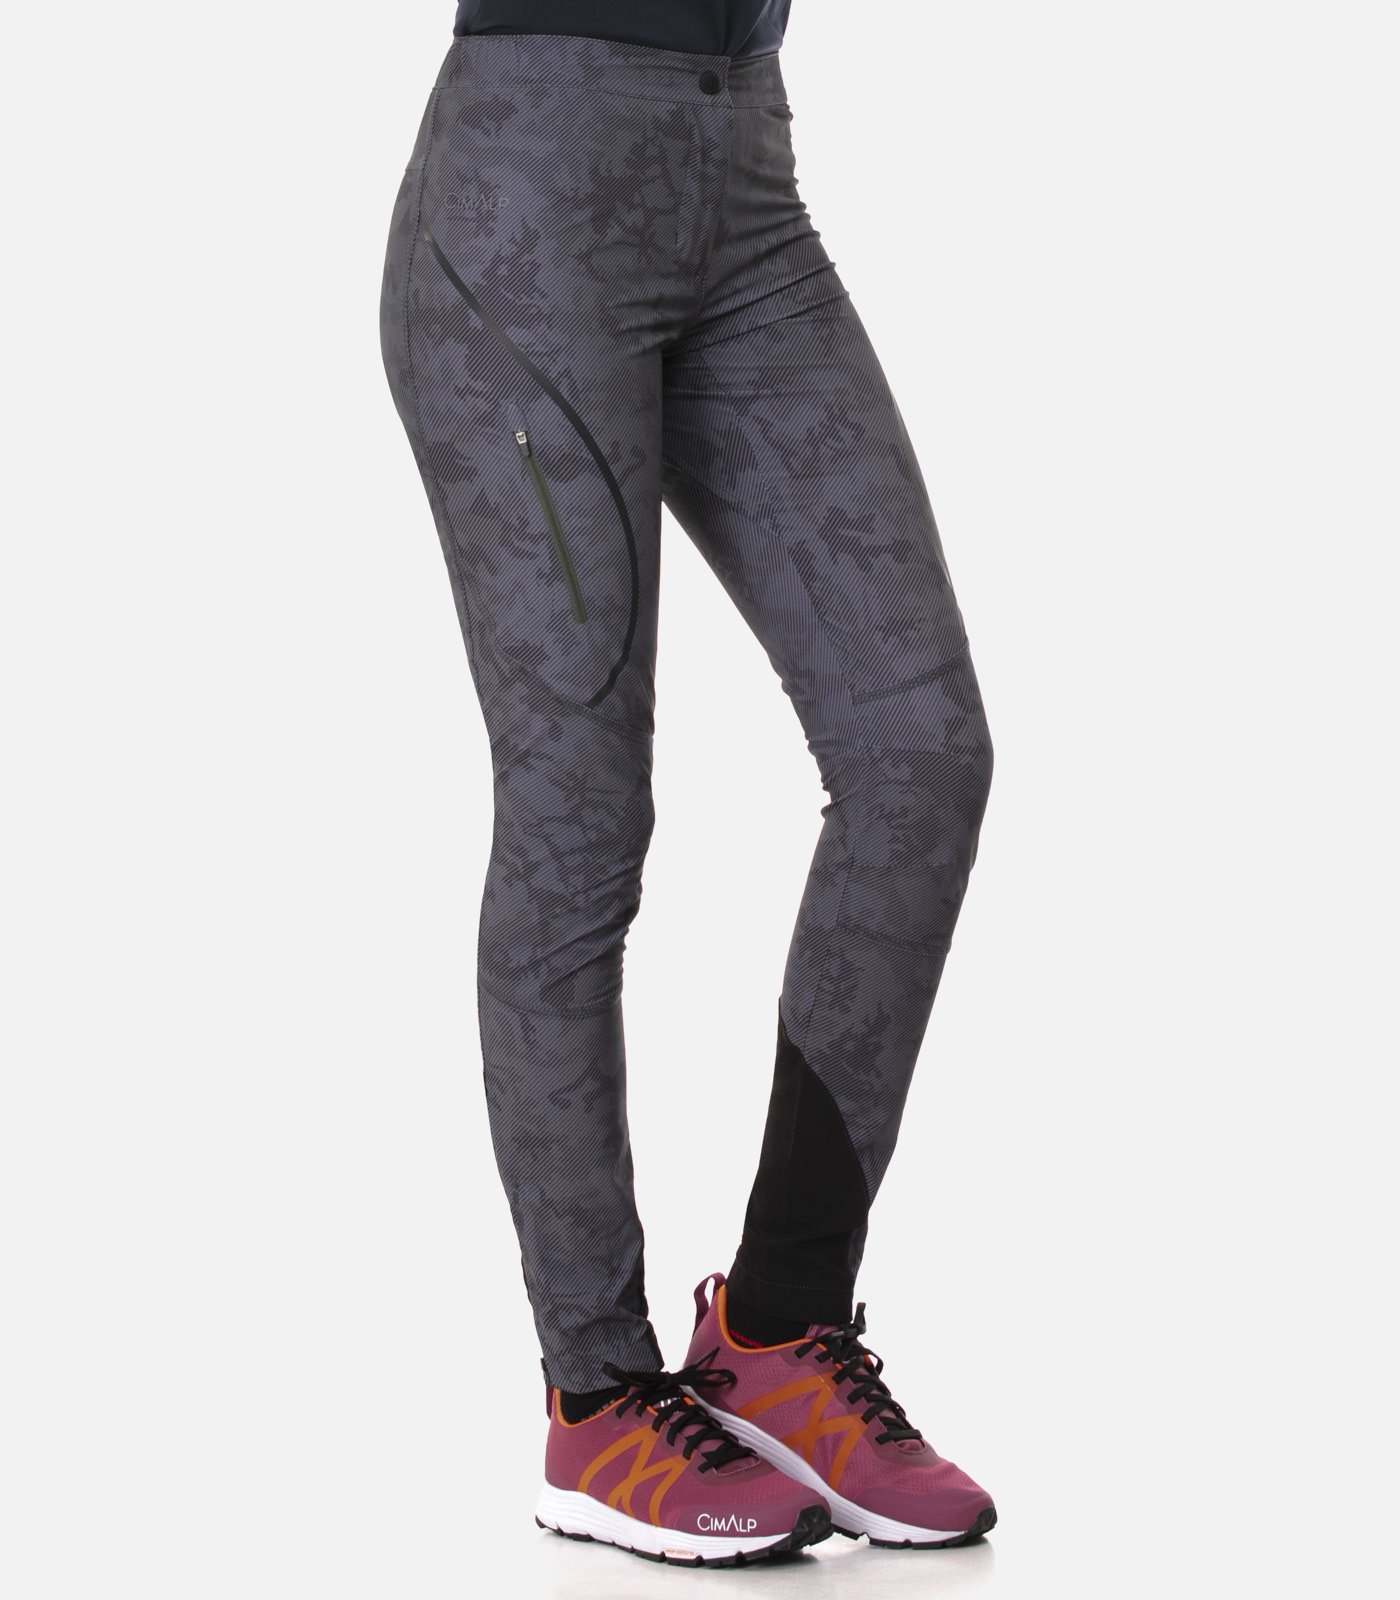 Trail Running trousers